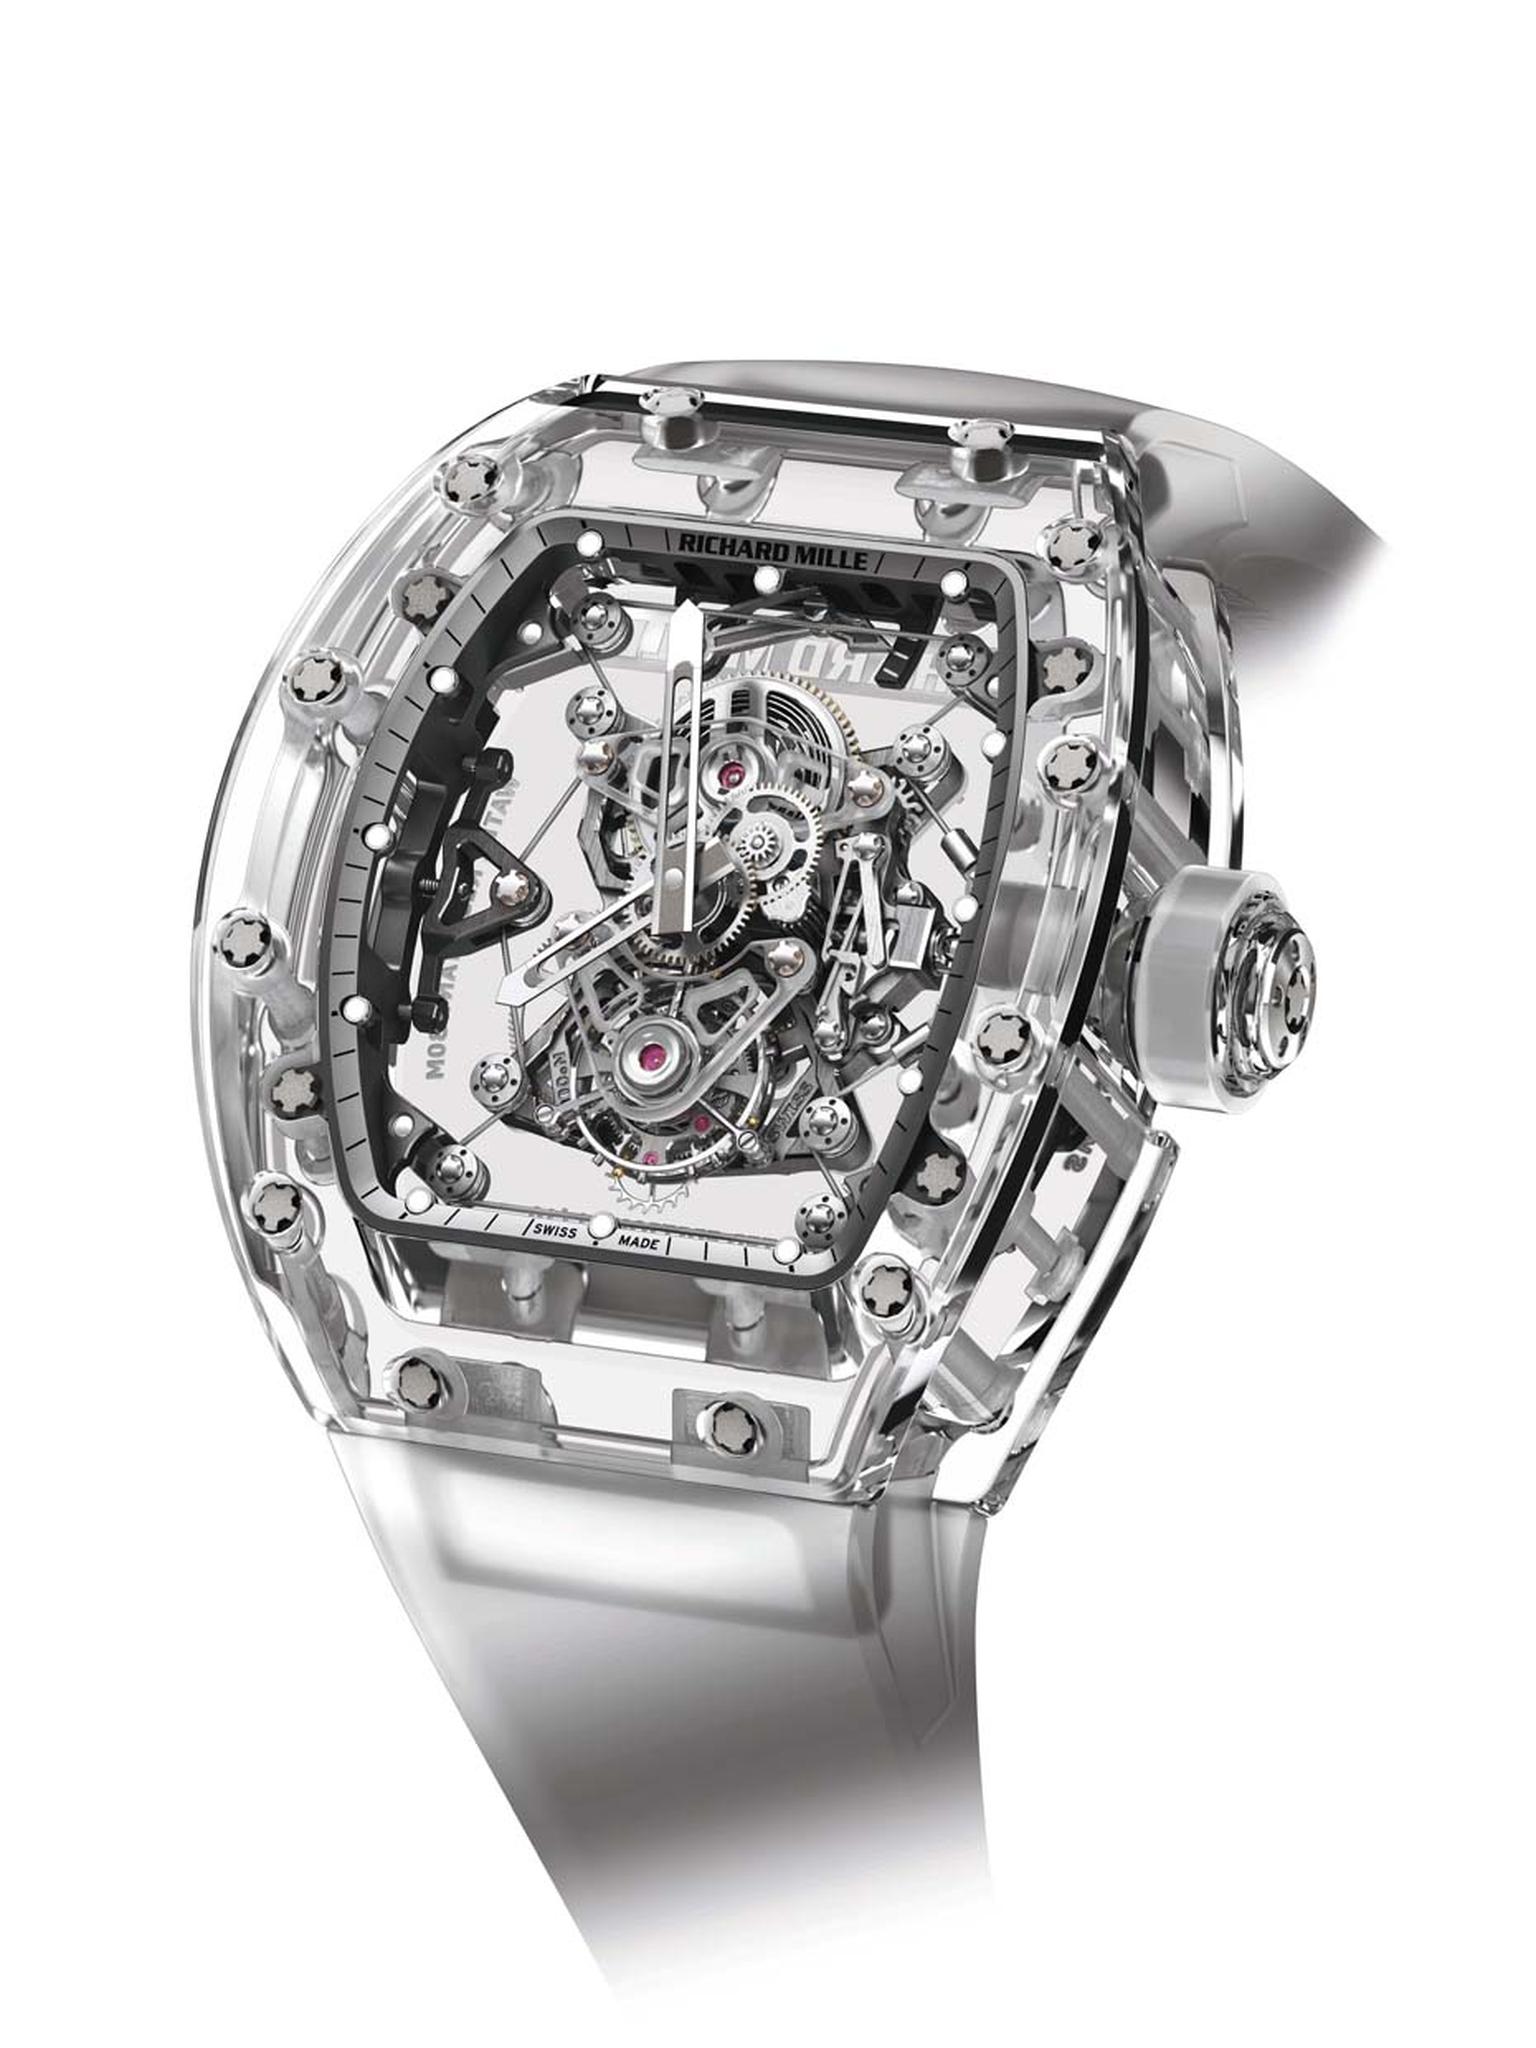 Richard Mille’s $2 million dollar RM56-02 Sapphire Tourbillon features a transparent case made from sapphire crystal so that every last screw is on view, including the cable-suspended movement featured in Rafael Nadal’s RM27-01 watch.